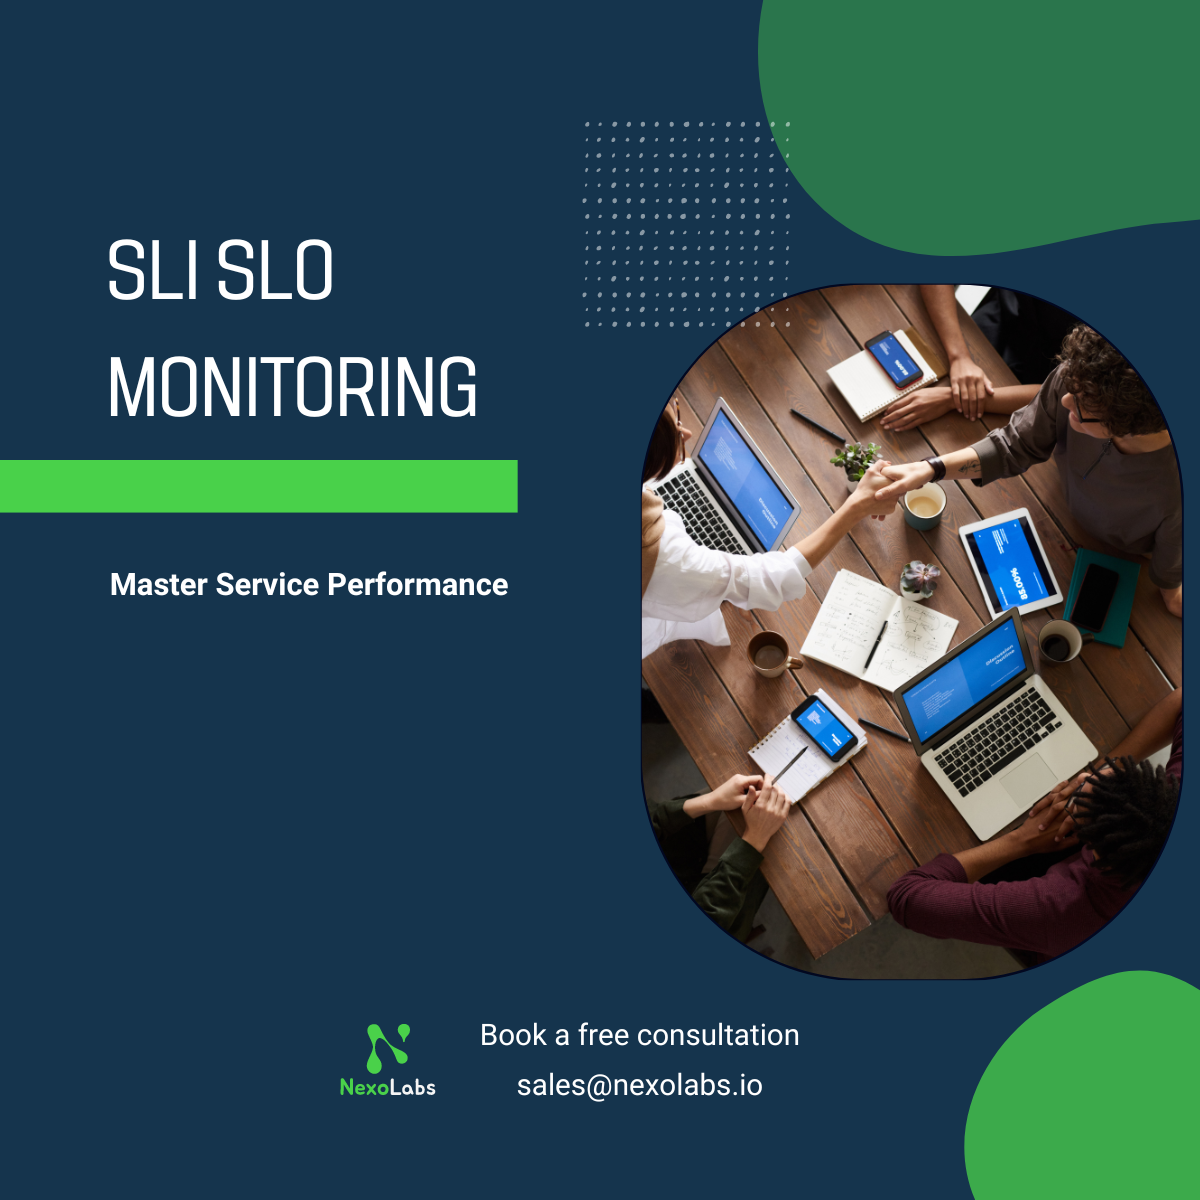 Confused by SLI, SLO monitoring? We break it down! Learn how these metrics improve service performance & ensure user satisfaction.